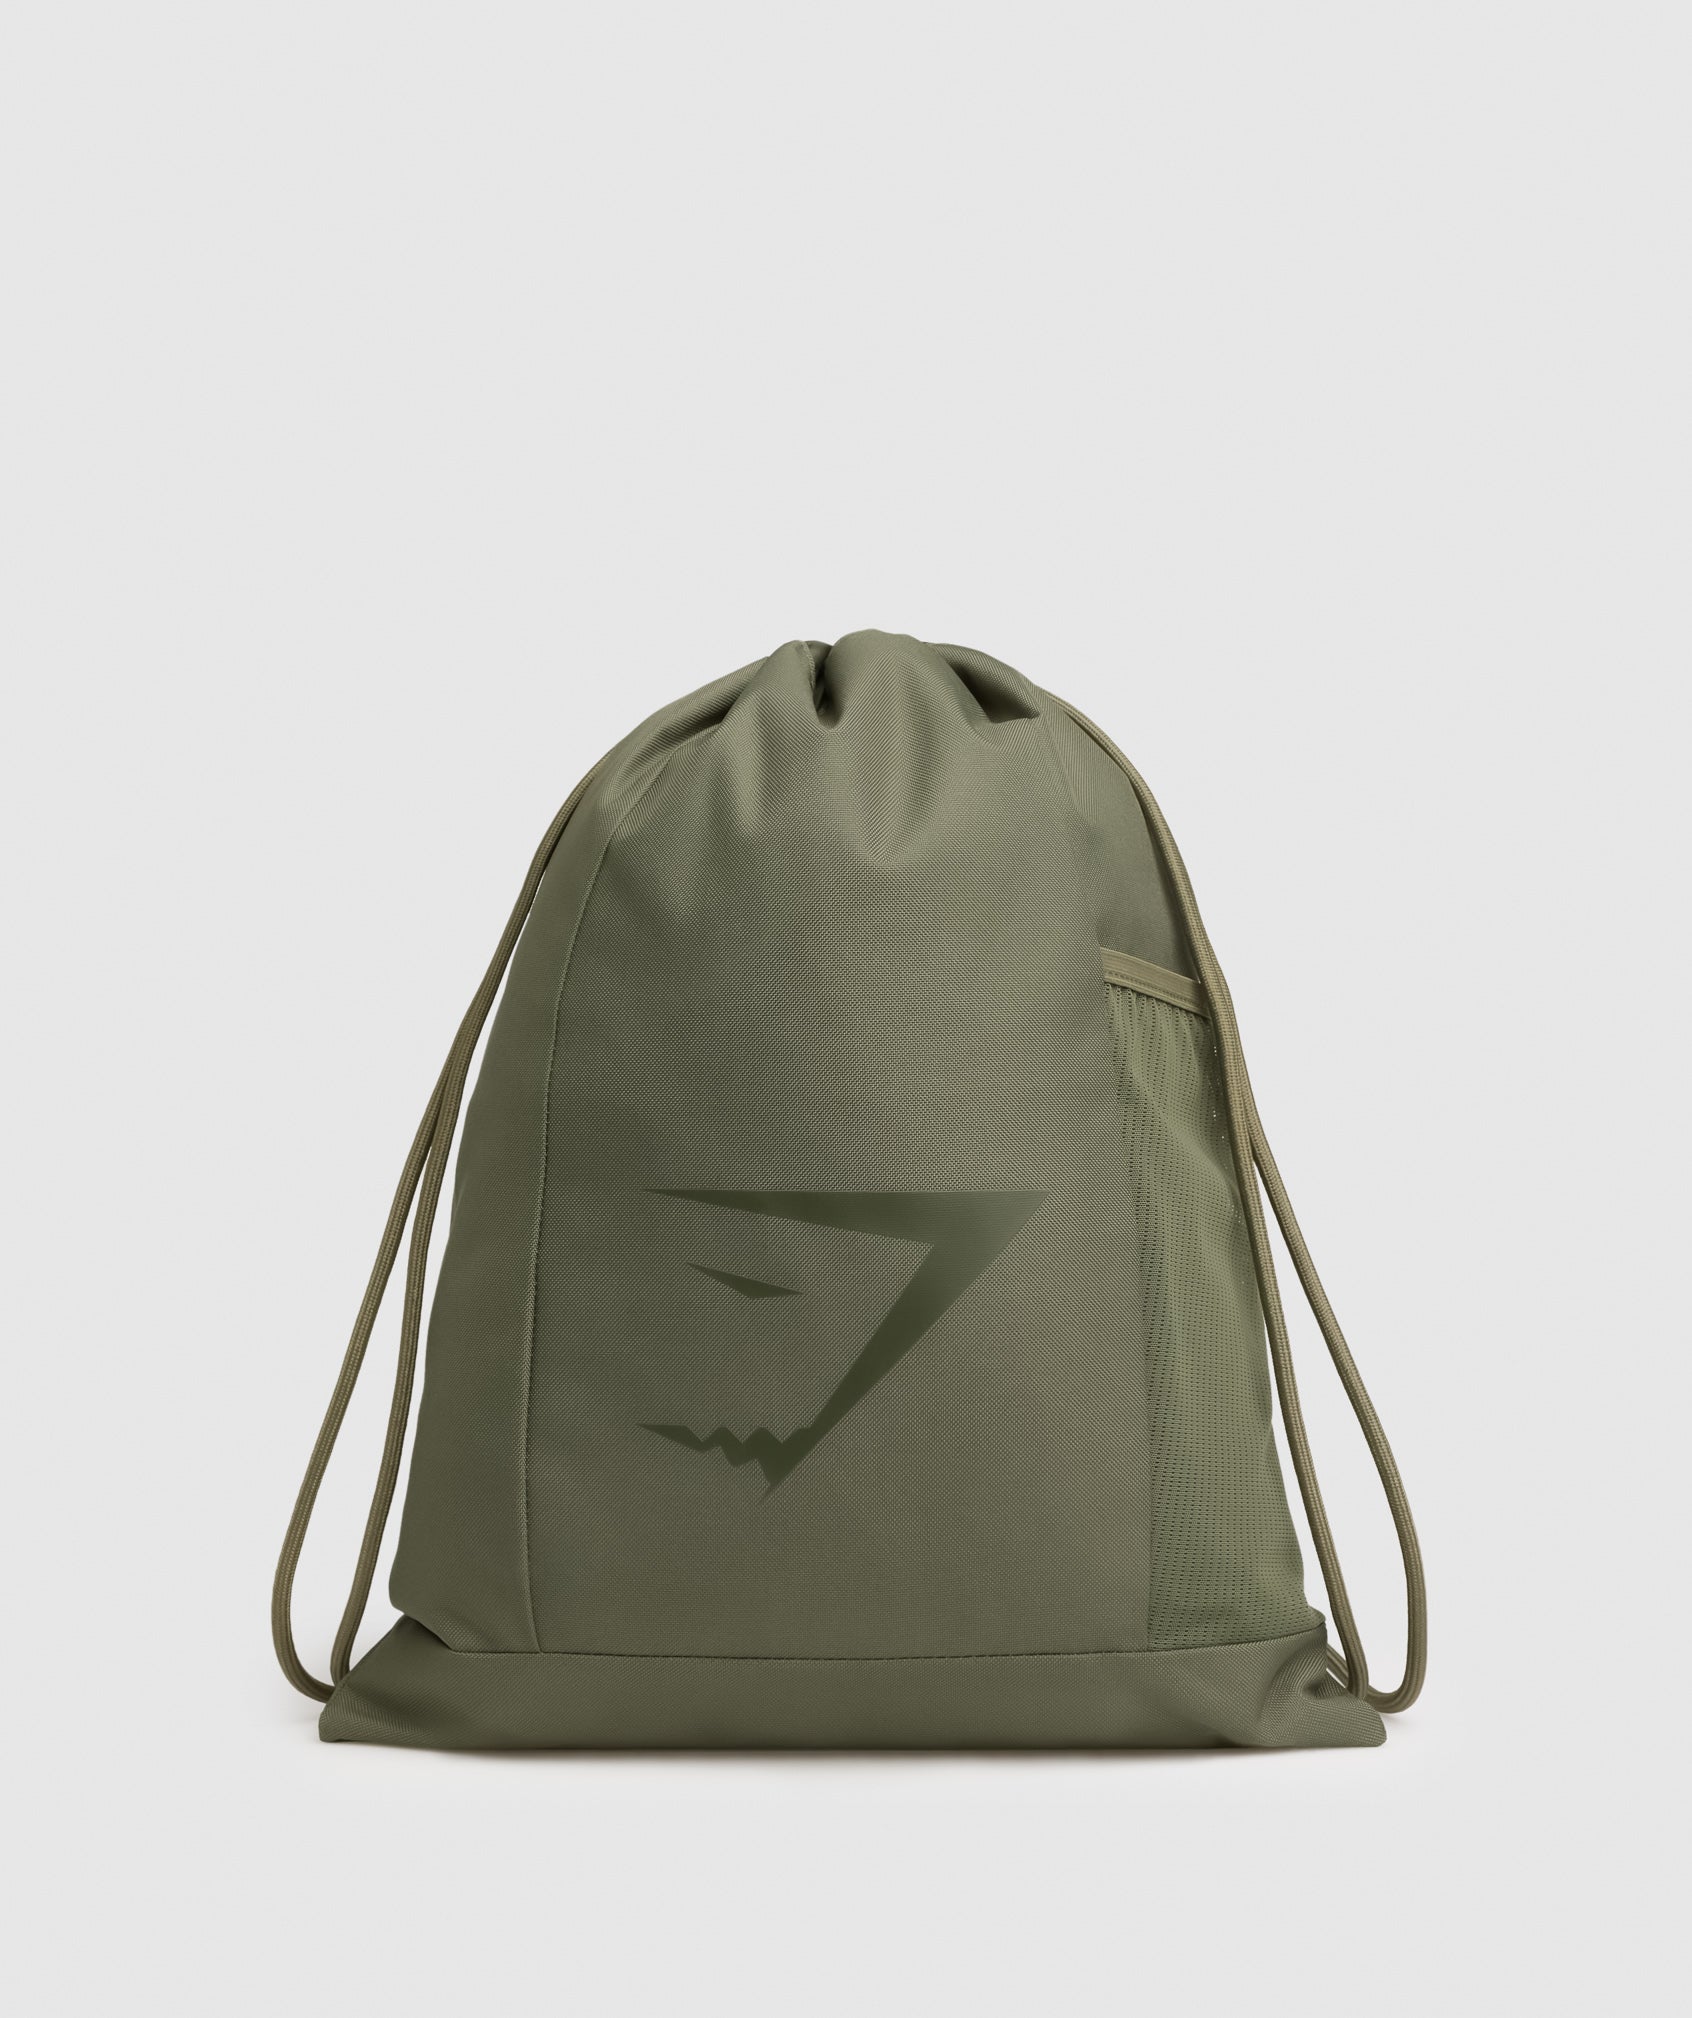 Sharkhead Gymsack in {{variantColor} is out of stock